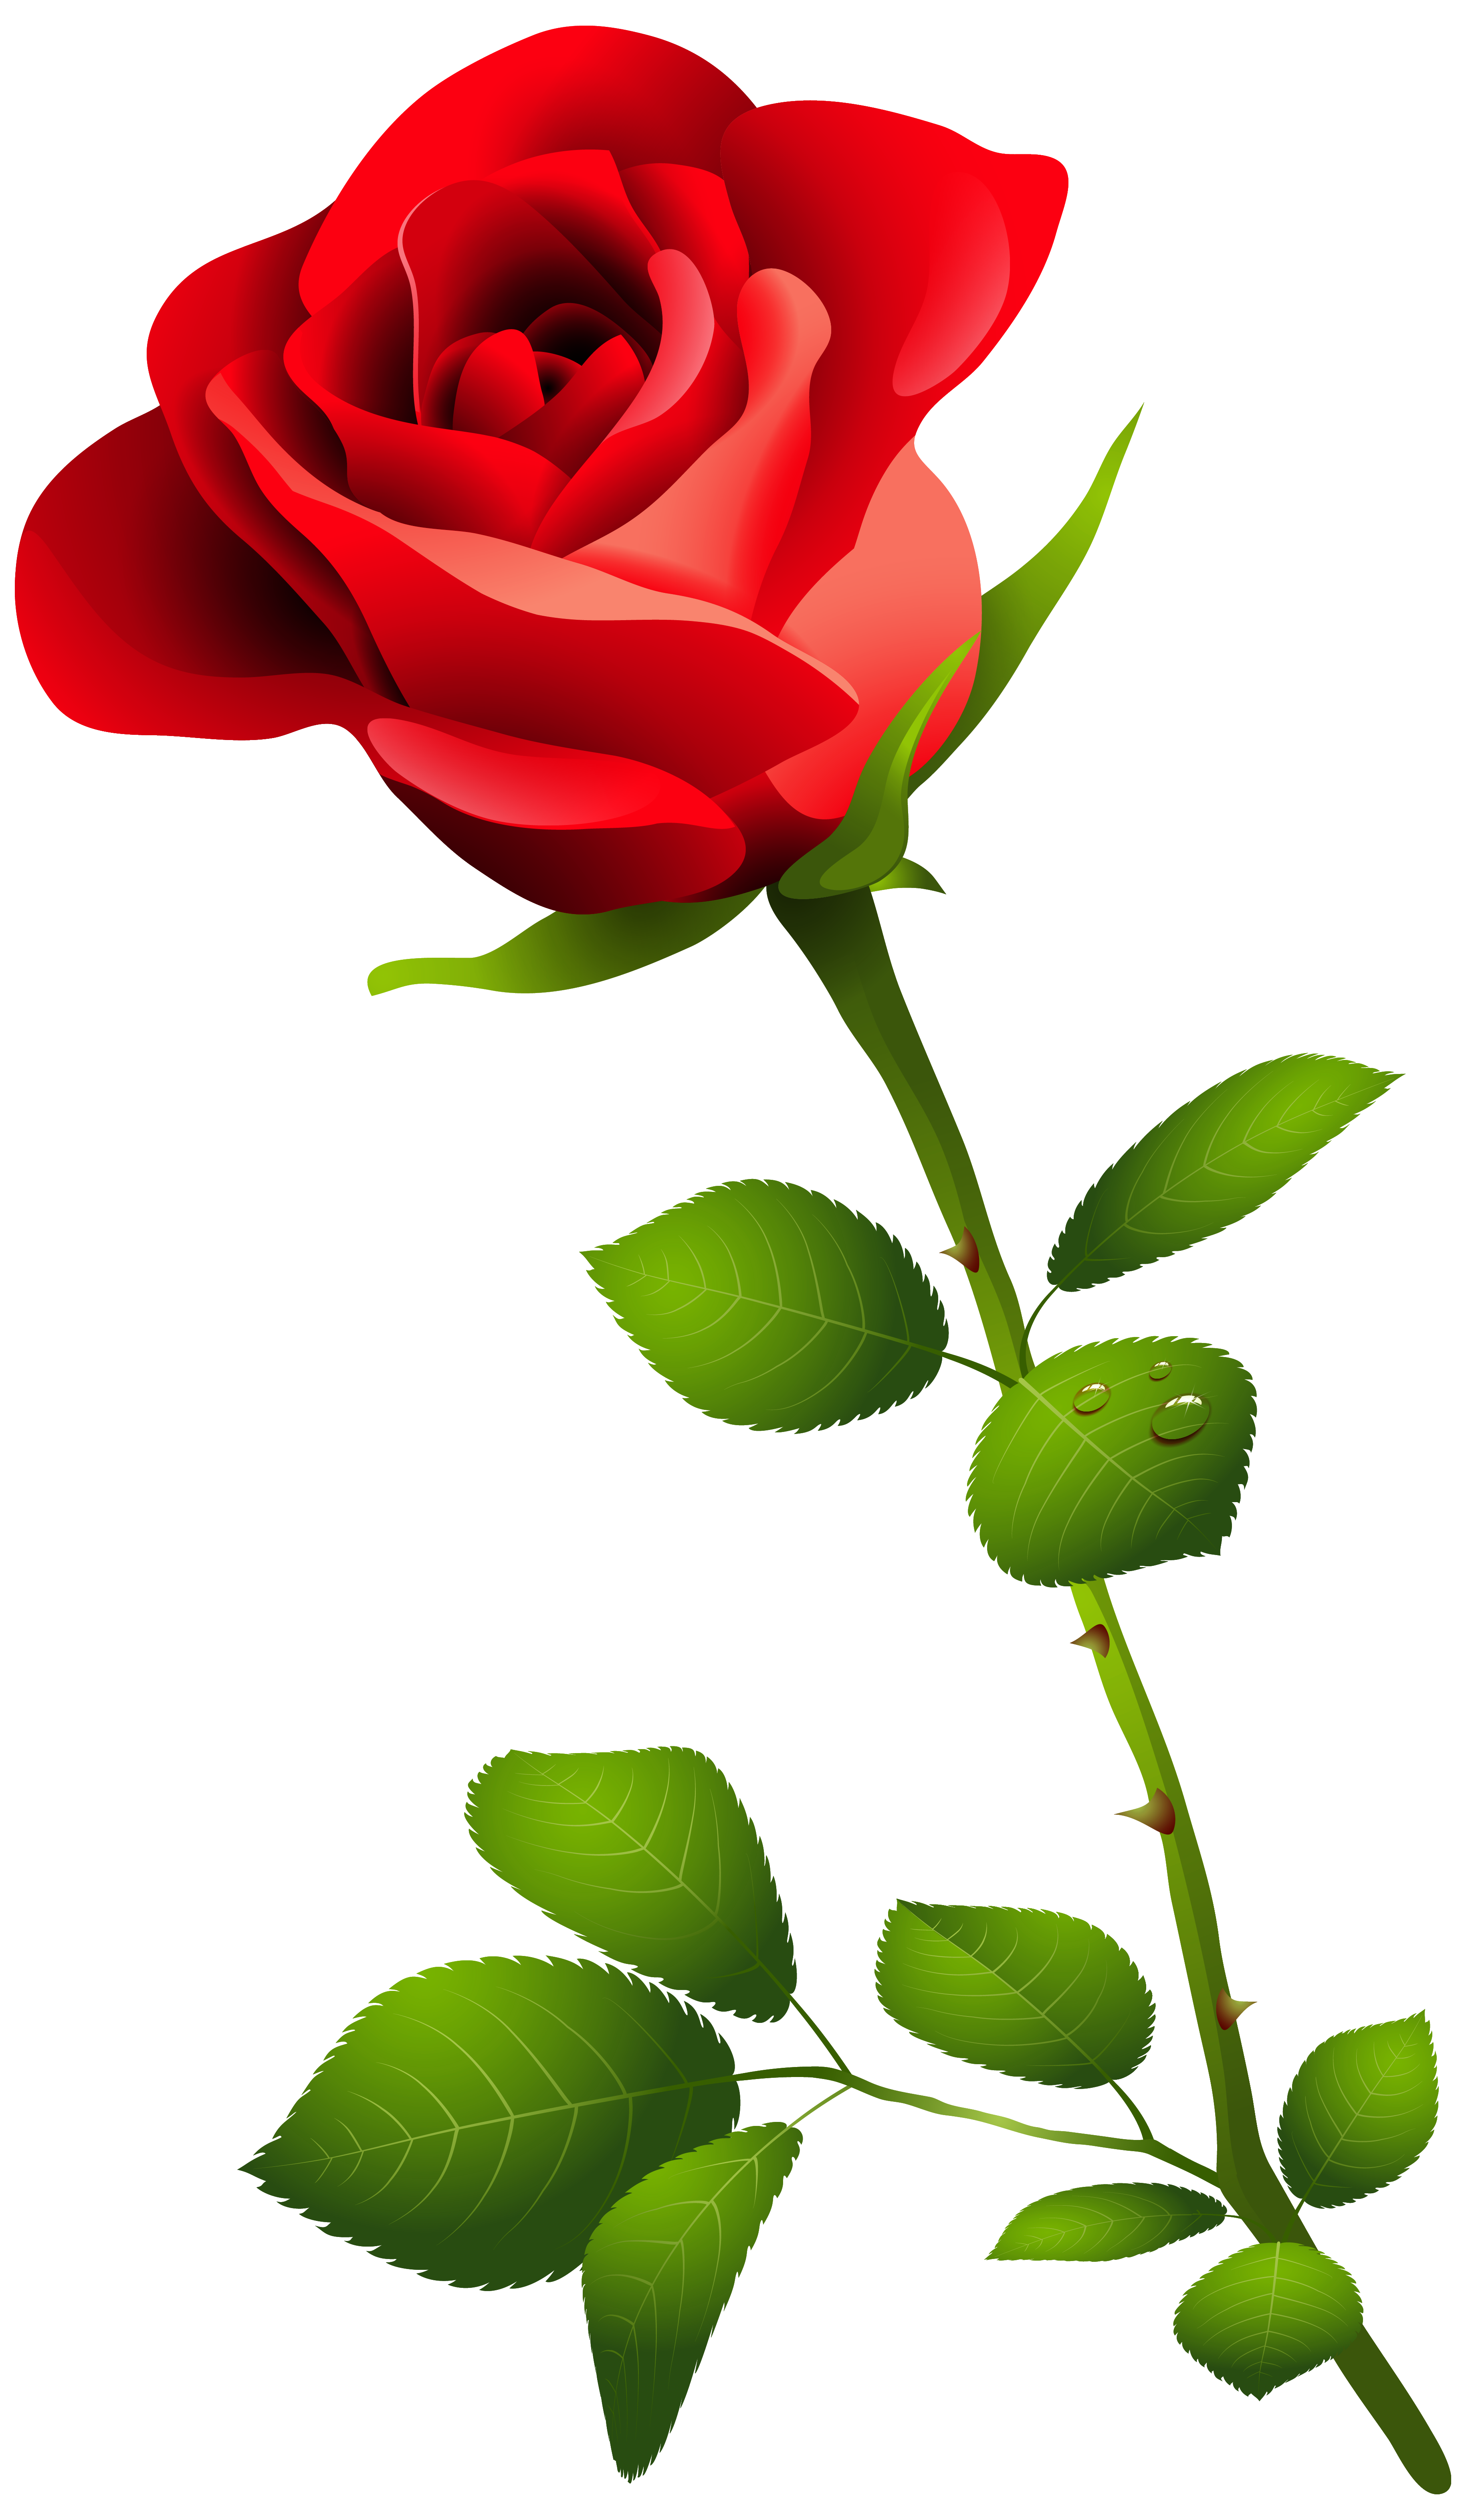 Red Rose with Stem PNG Clipart Image.